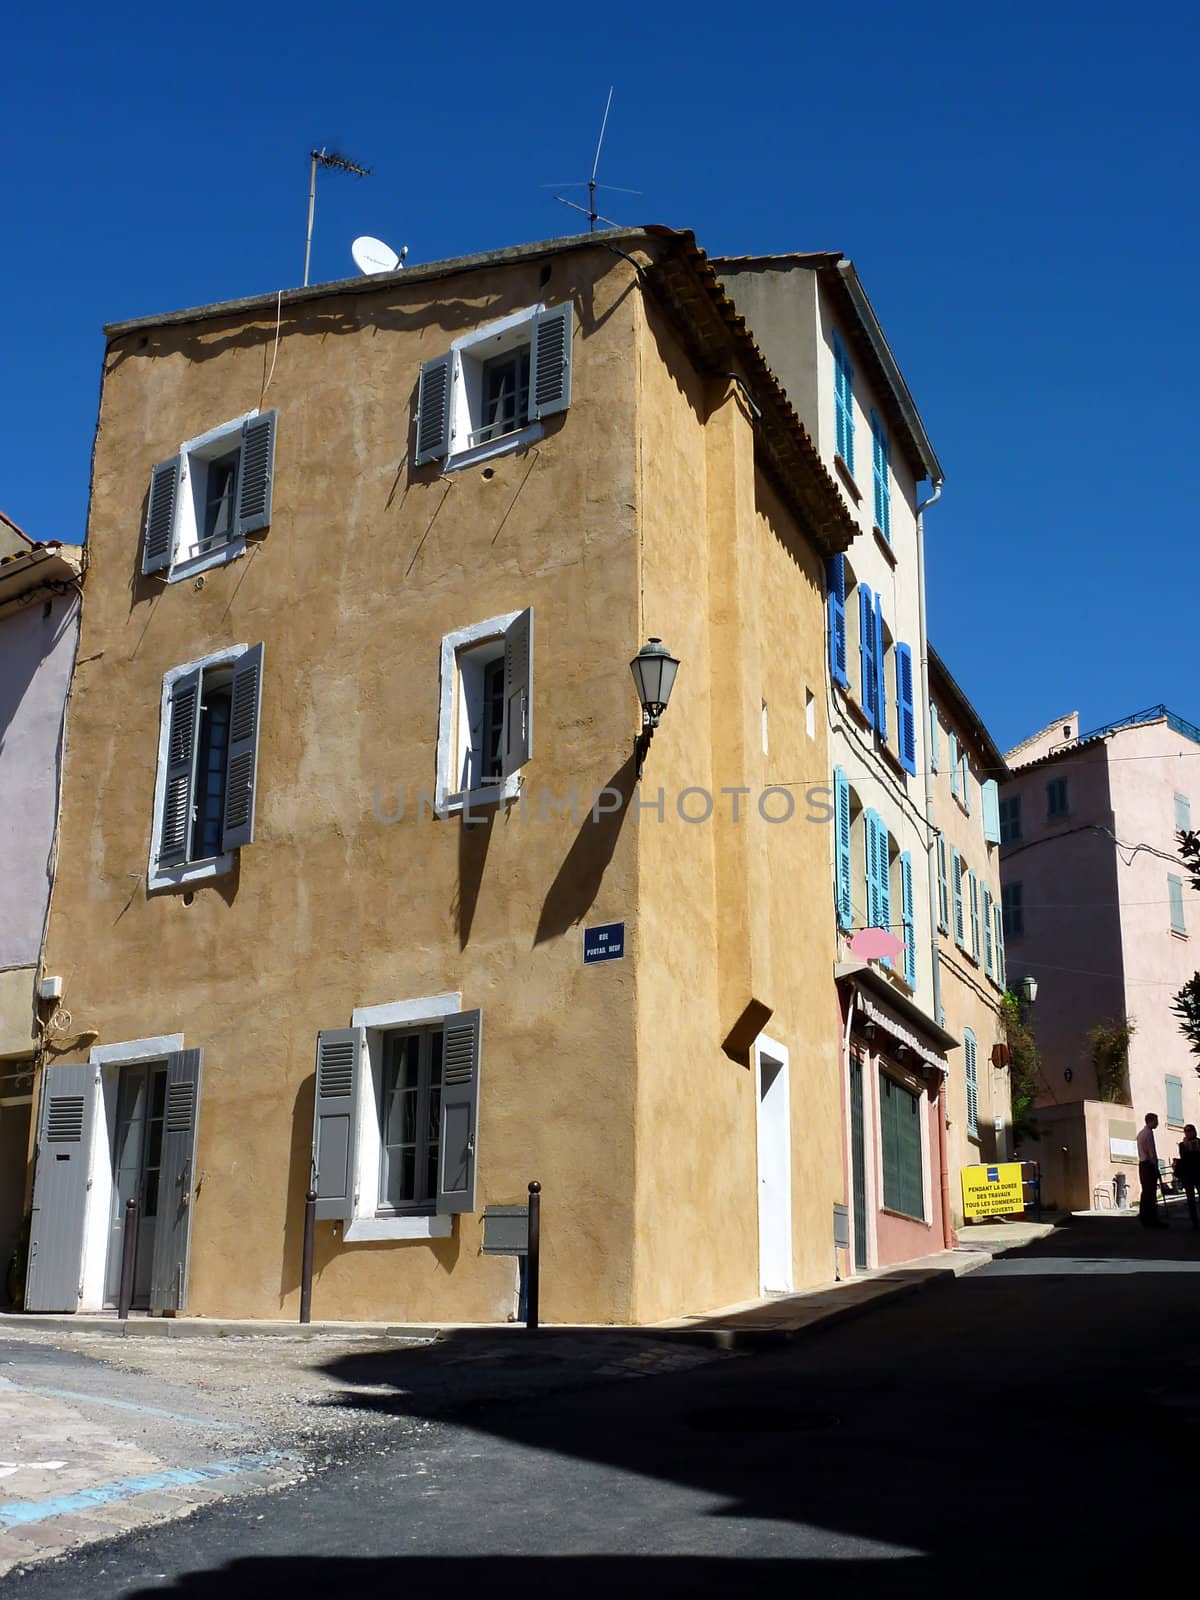 Colored house with shutters in a street of Saint-Tropez, south of France, by beautiful weather